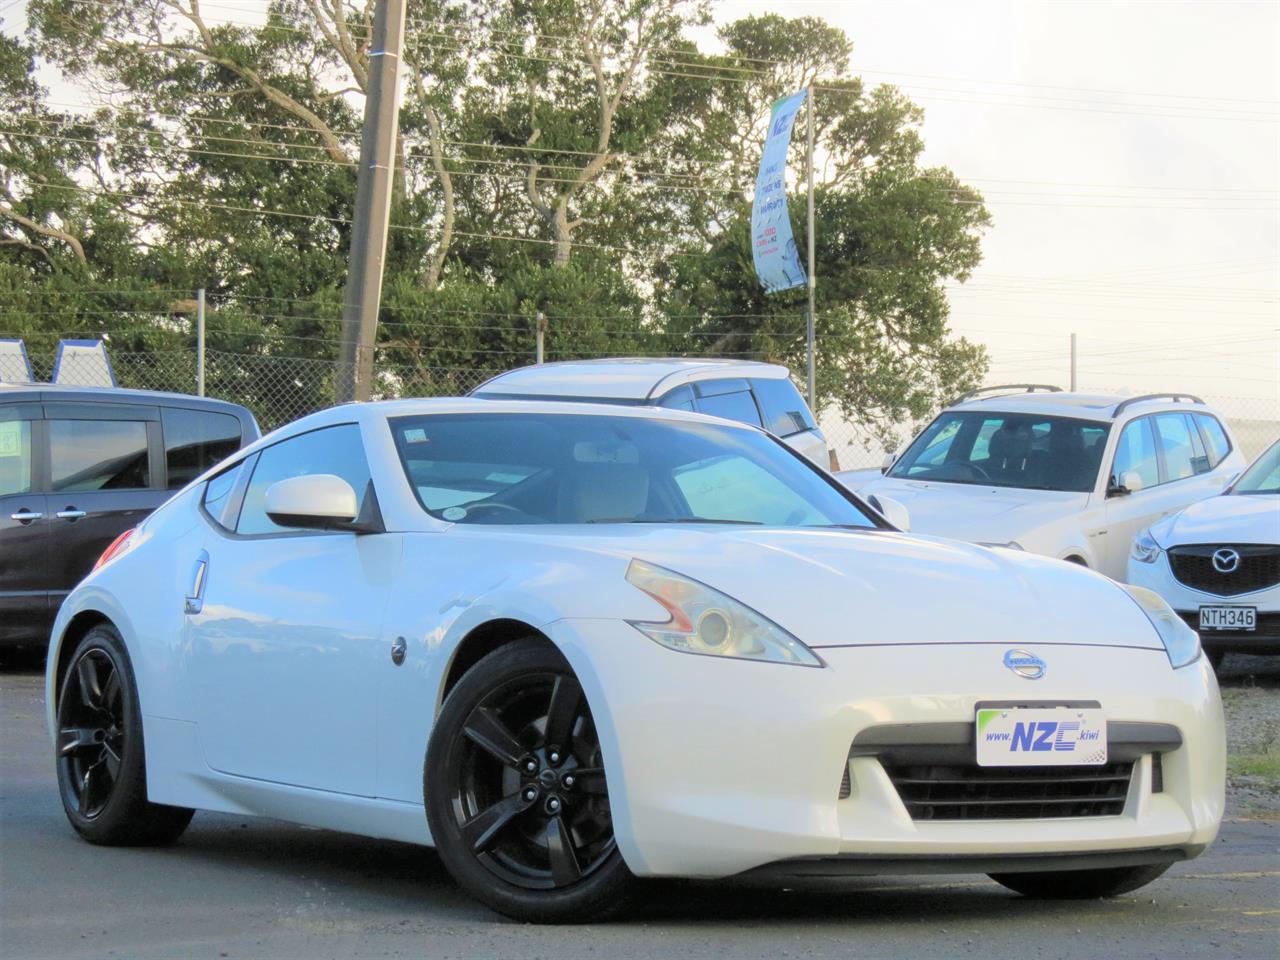 NZC 2008 Nissan FAIRLADY just arrived to Auckland